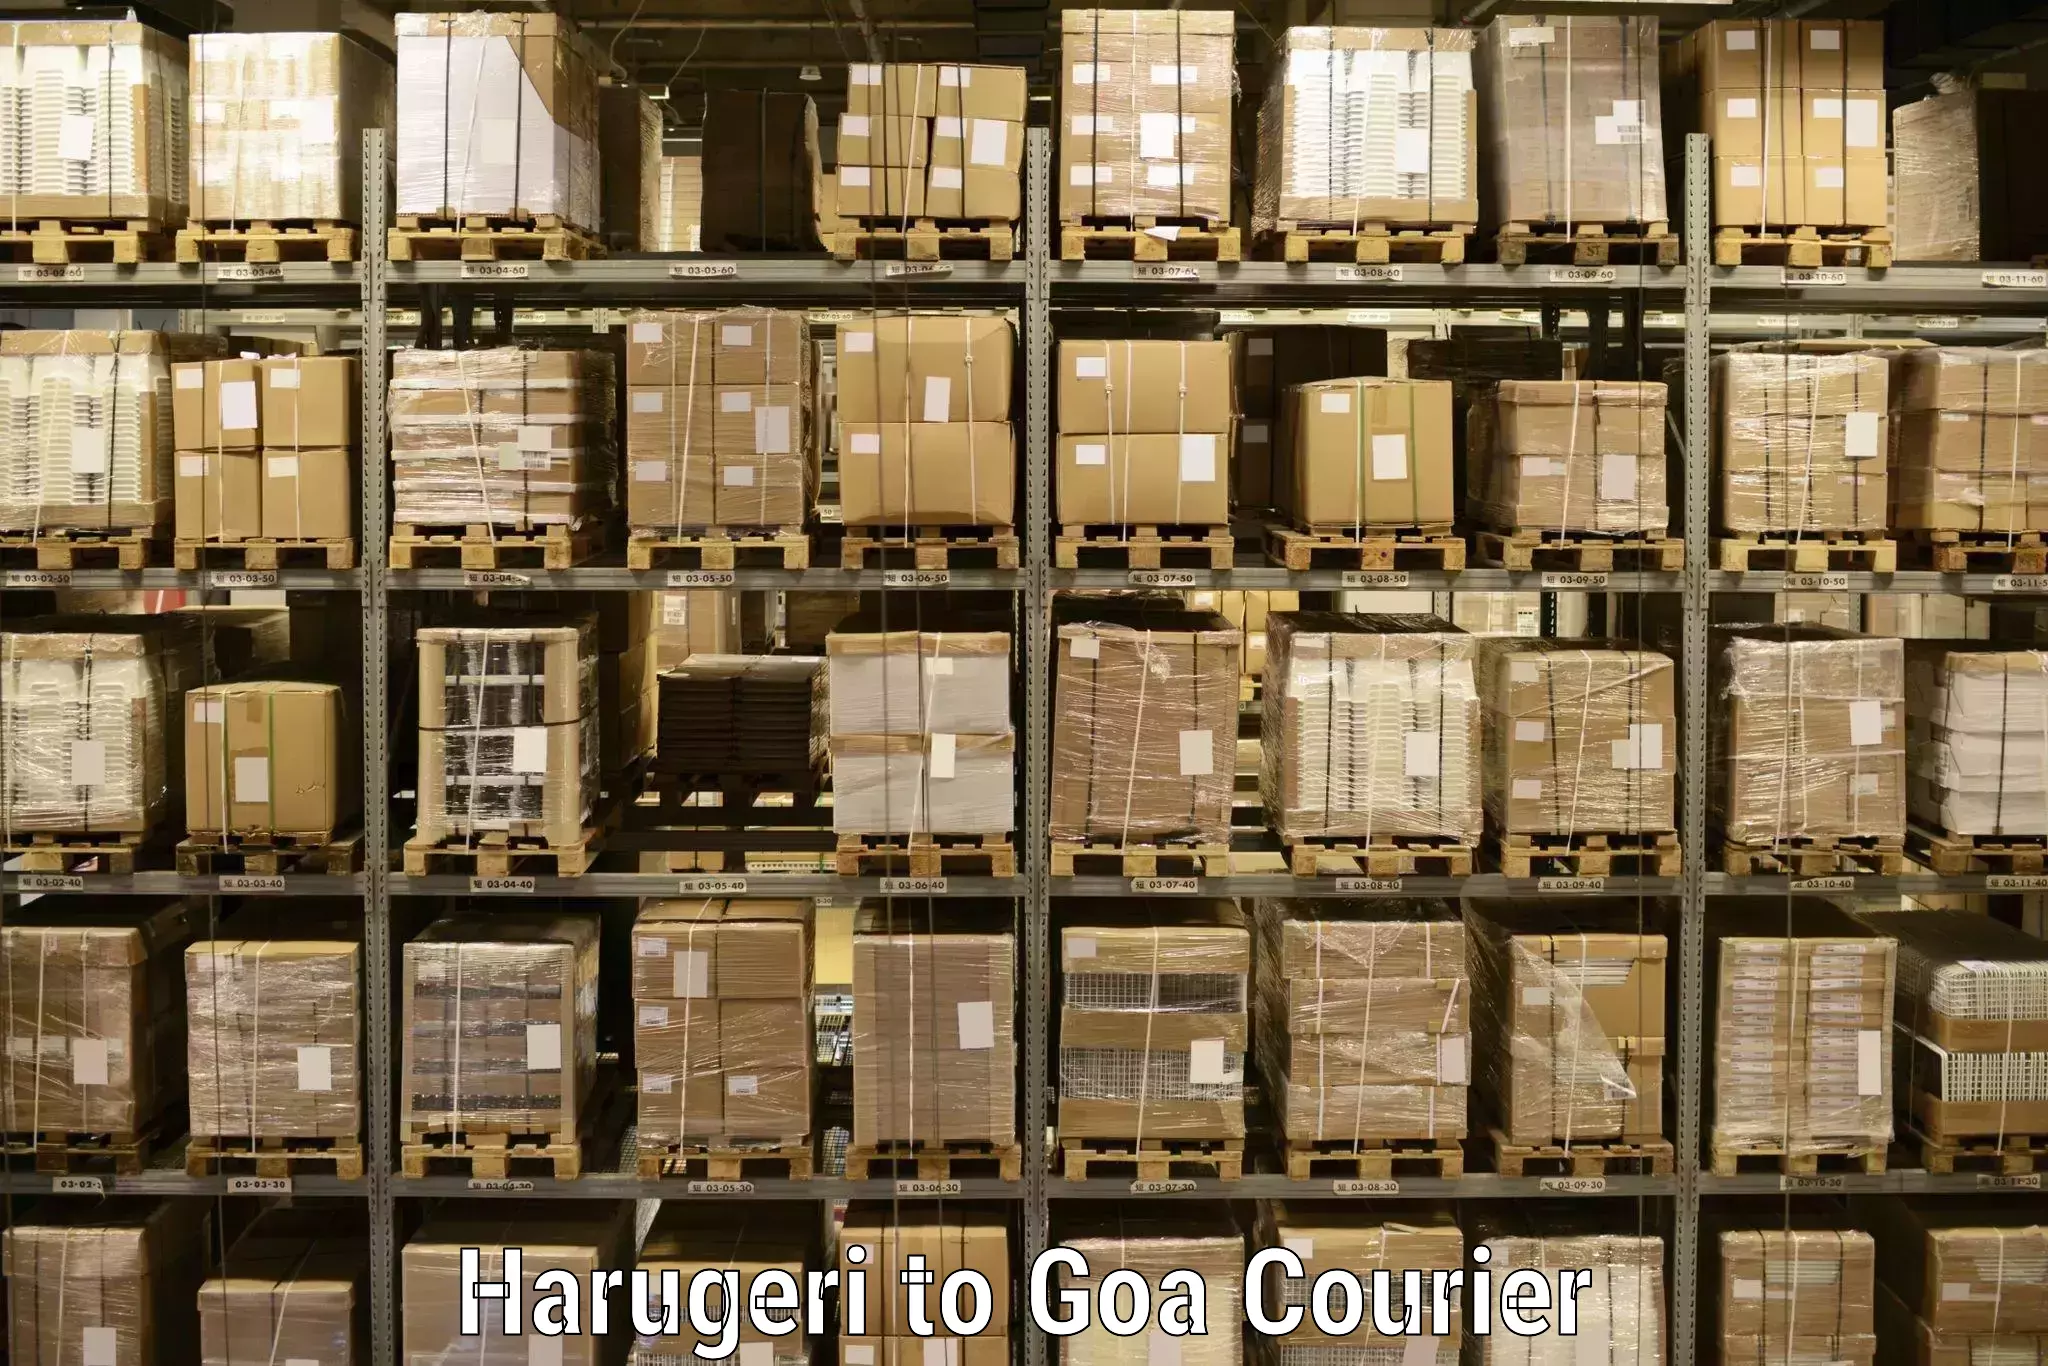 Sustainable delivery practices Harugeri to Goa